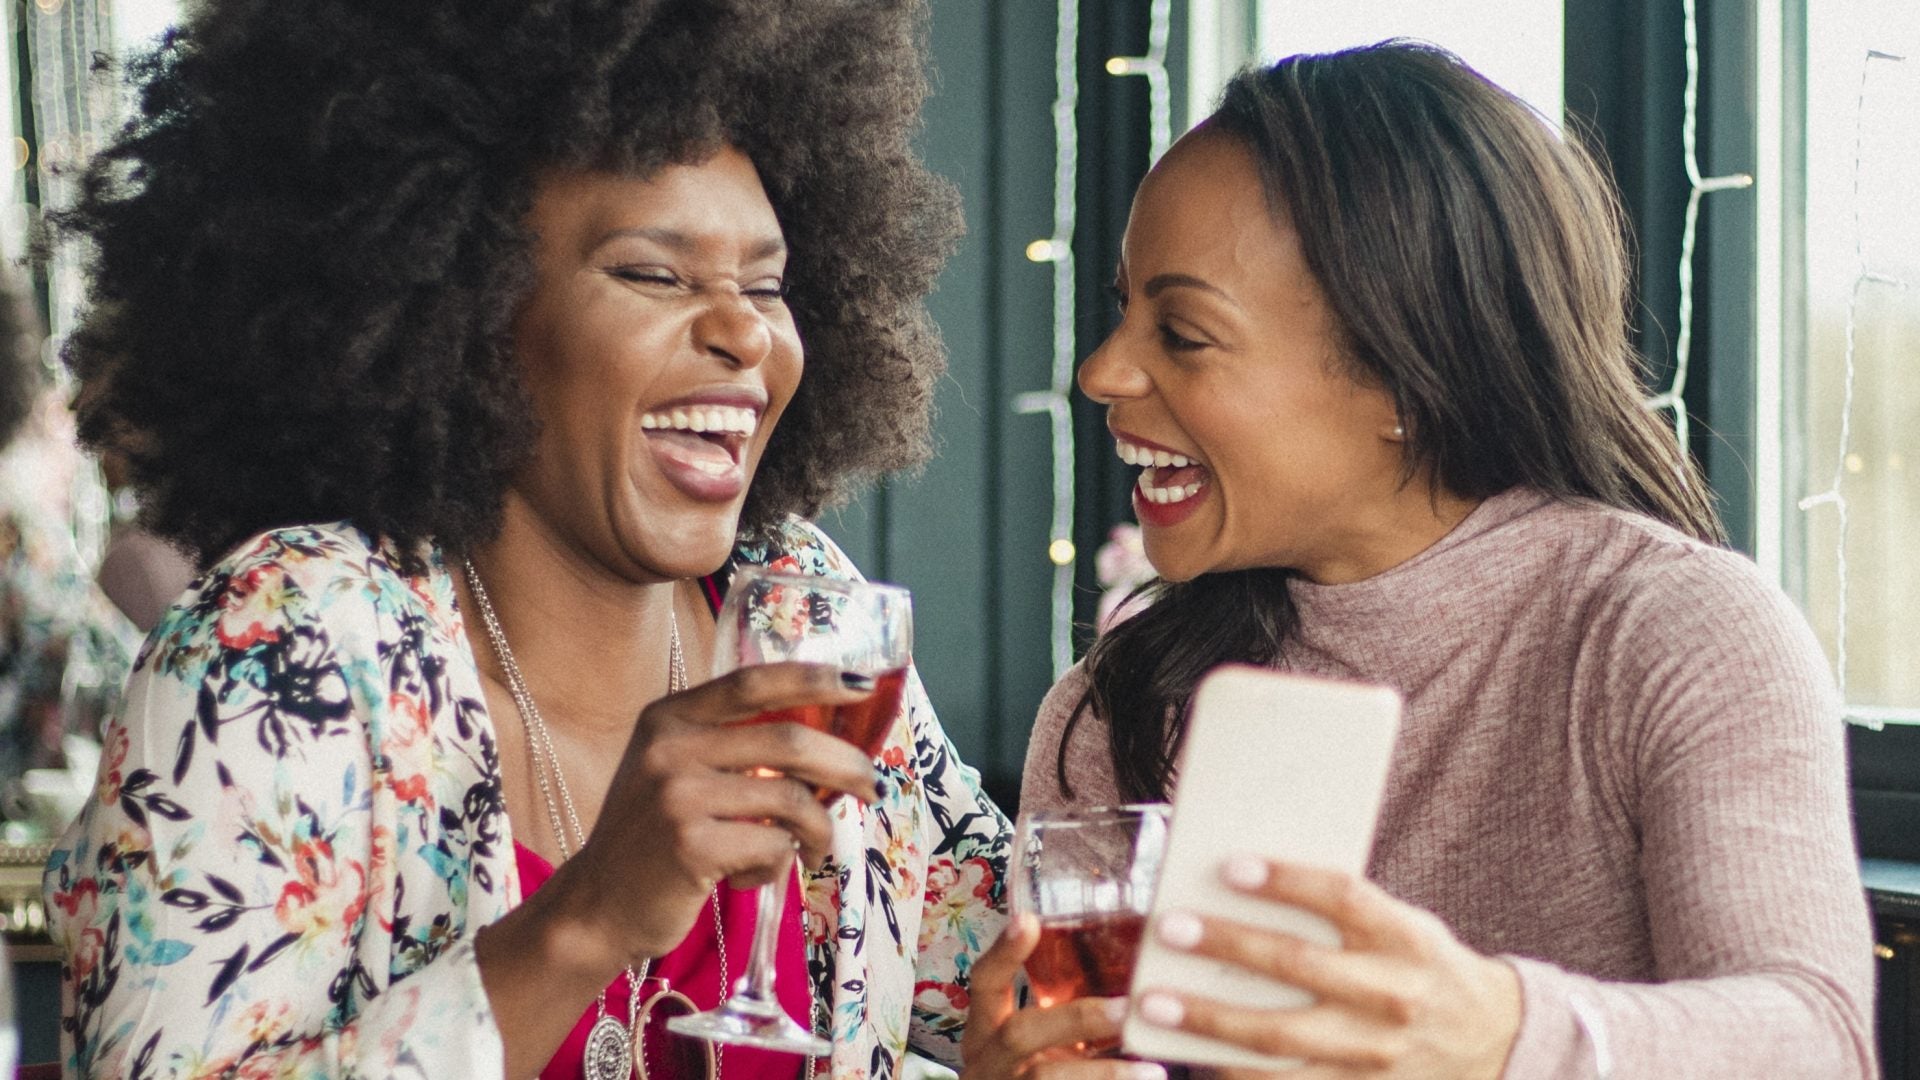 10 Ways To Celebrate Your Girlfriends On Valentine's Day